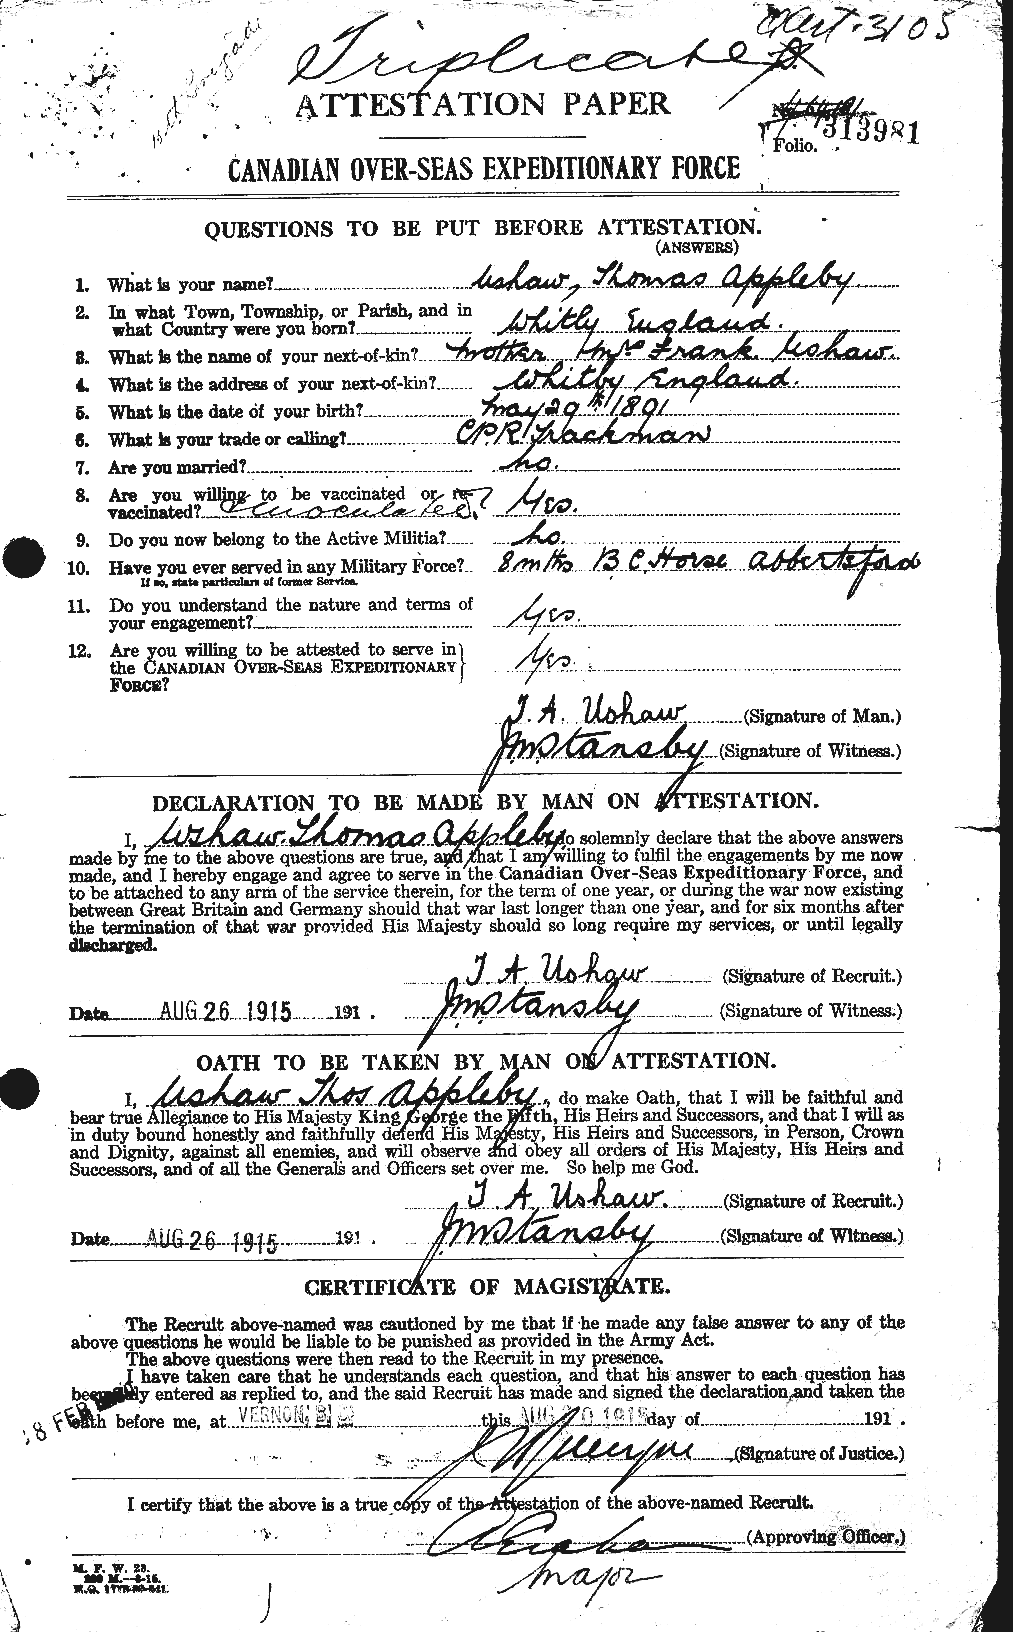 Personnel Records of the First World War - CEF 643466a